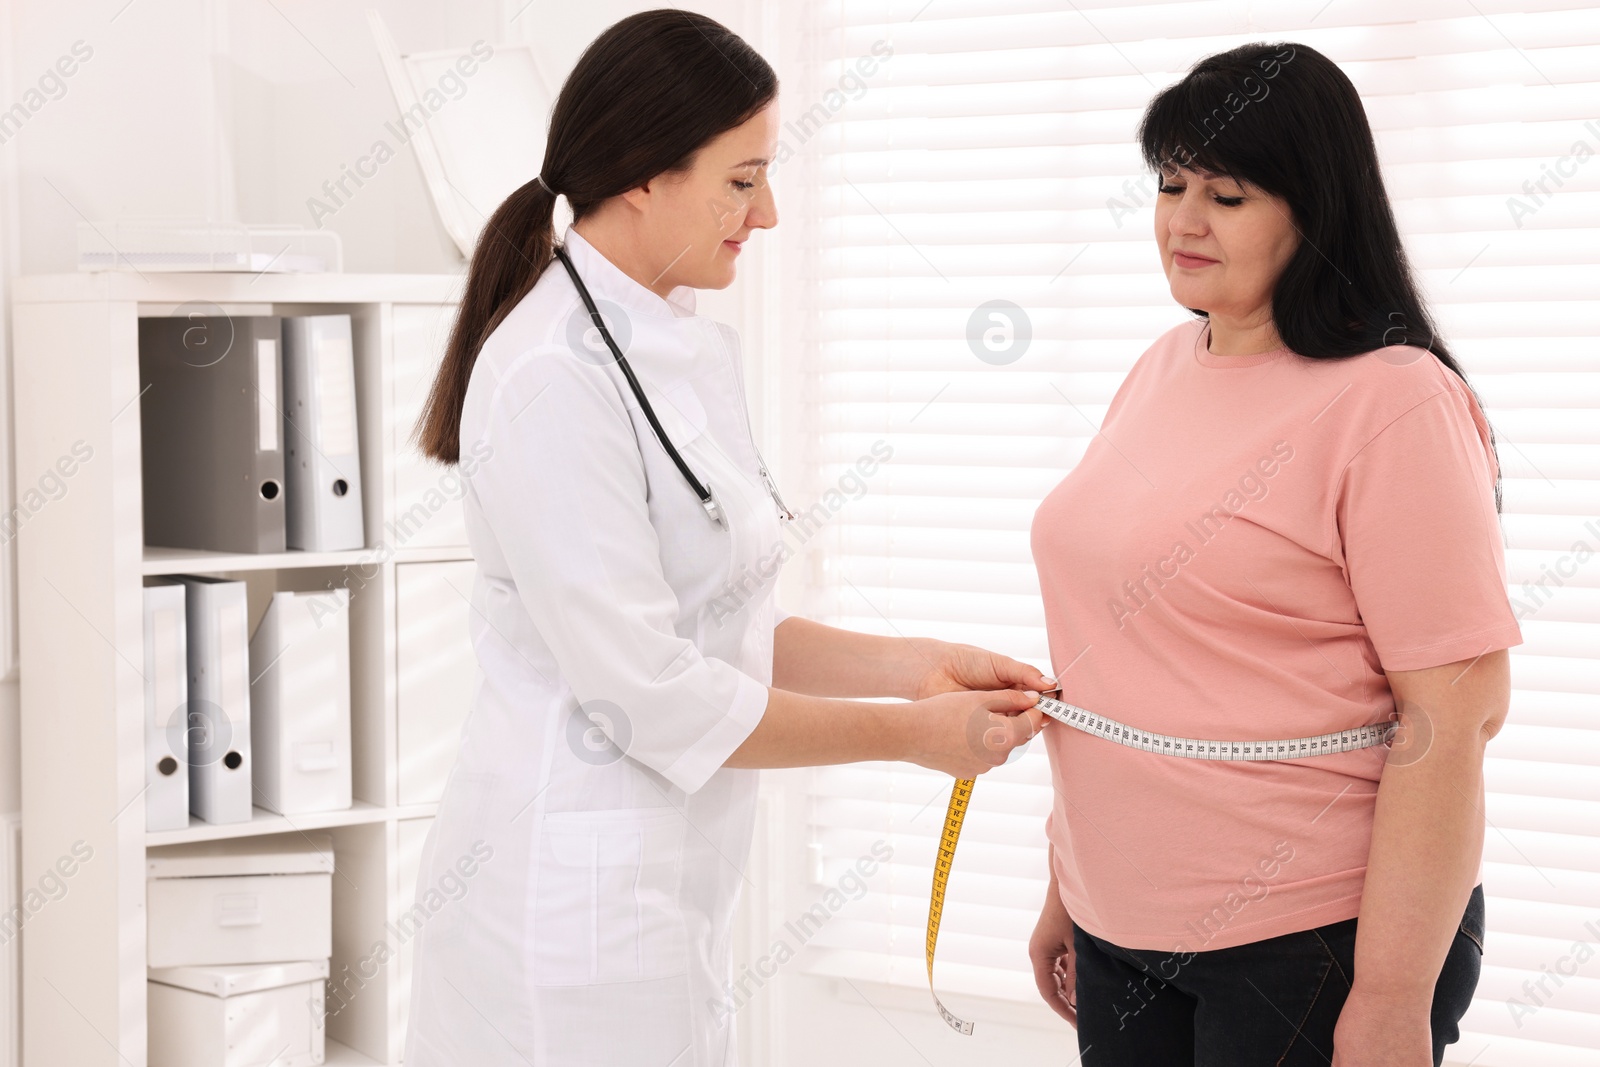 Photo of Nutritionist measuring overweight woman's waist with tape in clinic